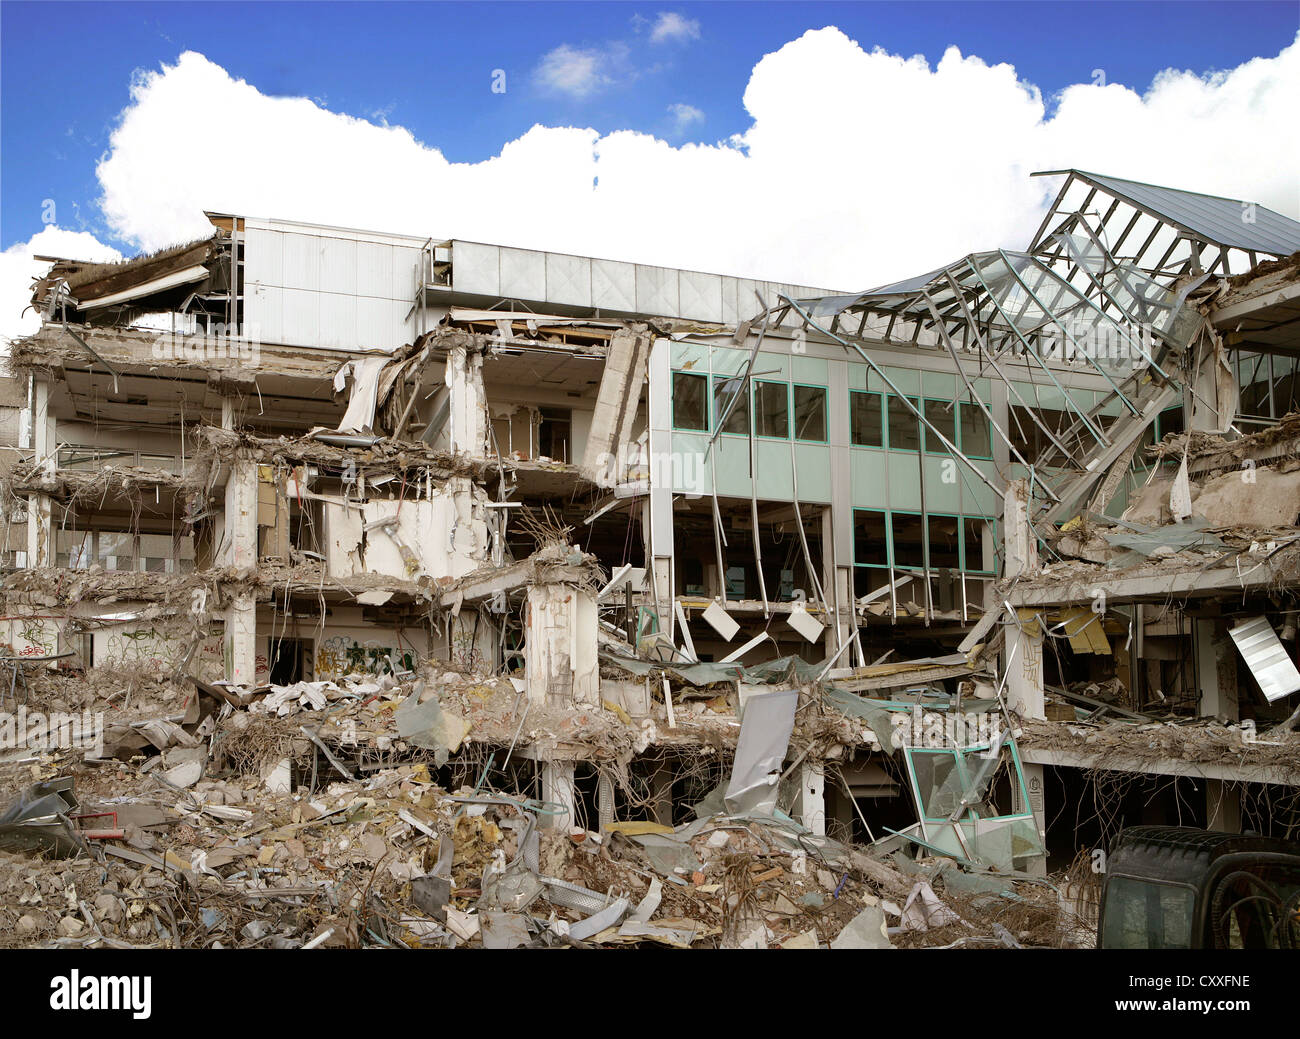 Demolition of a commercial building Stock Photo